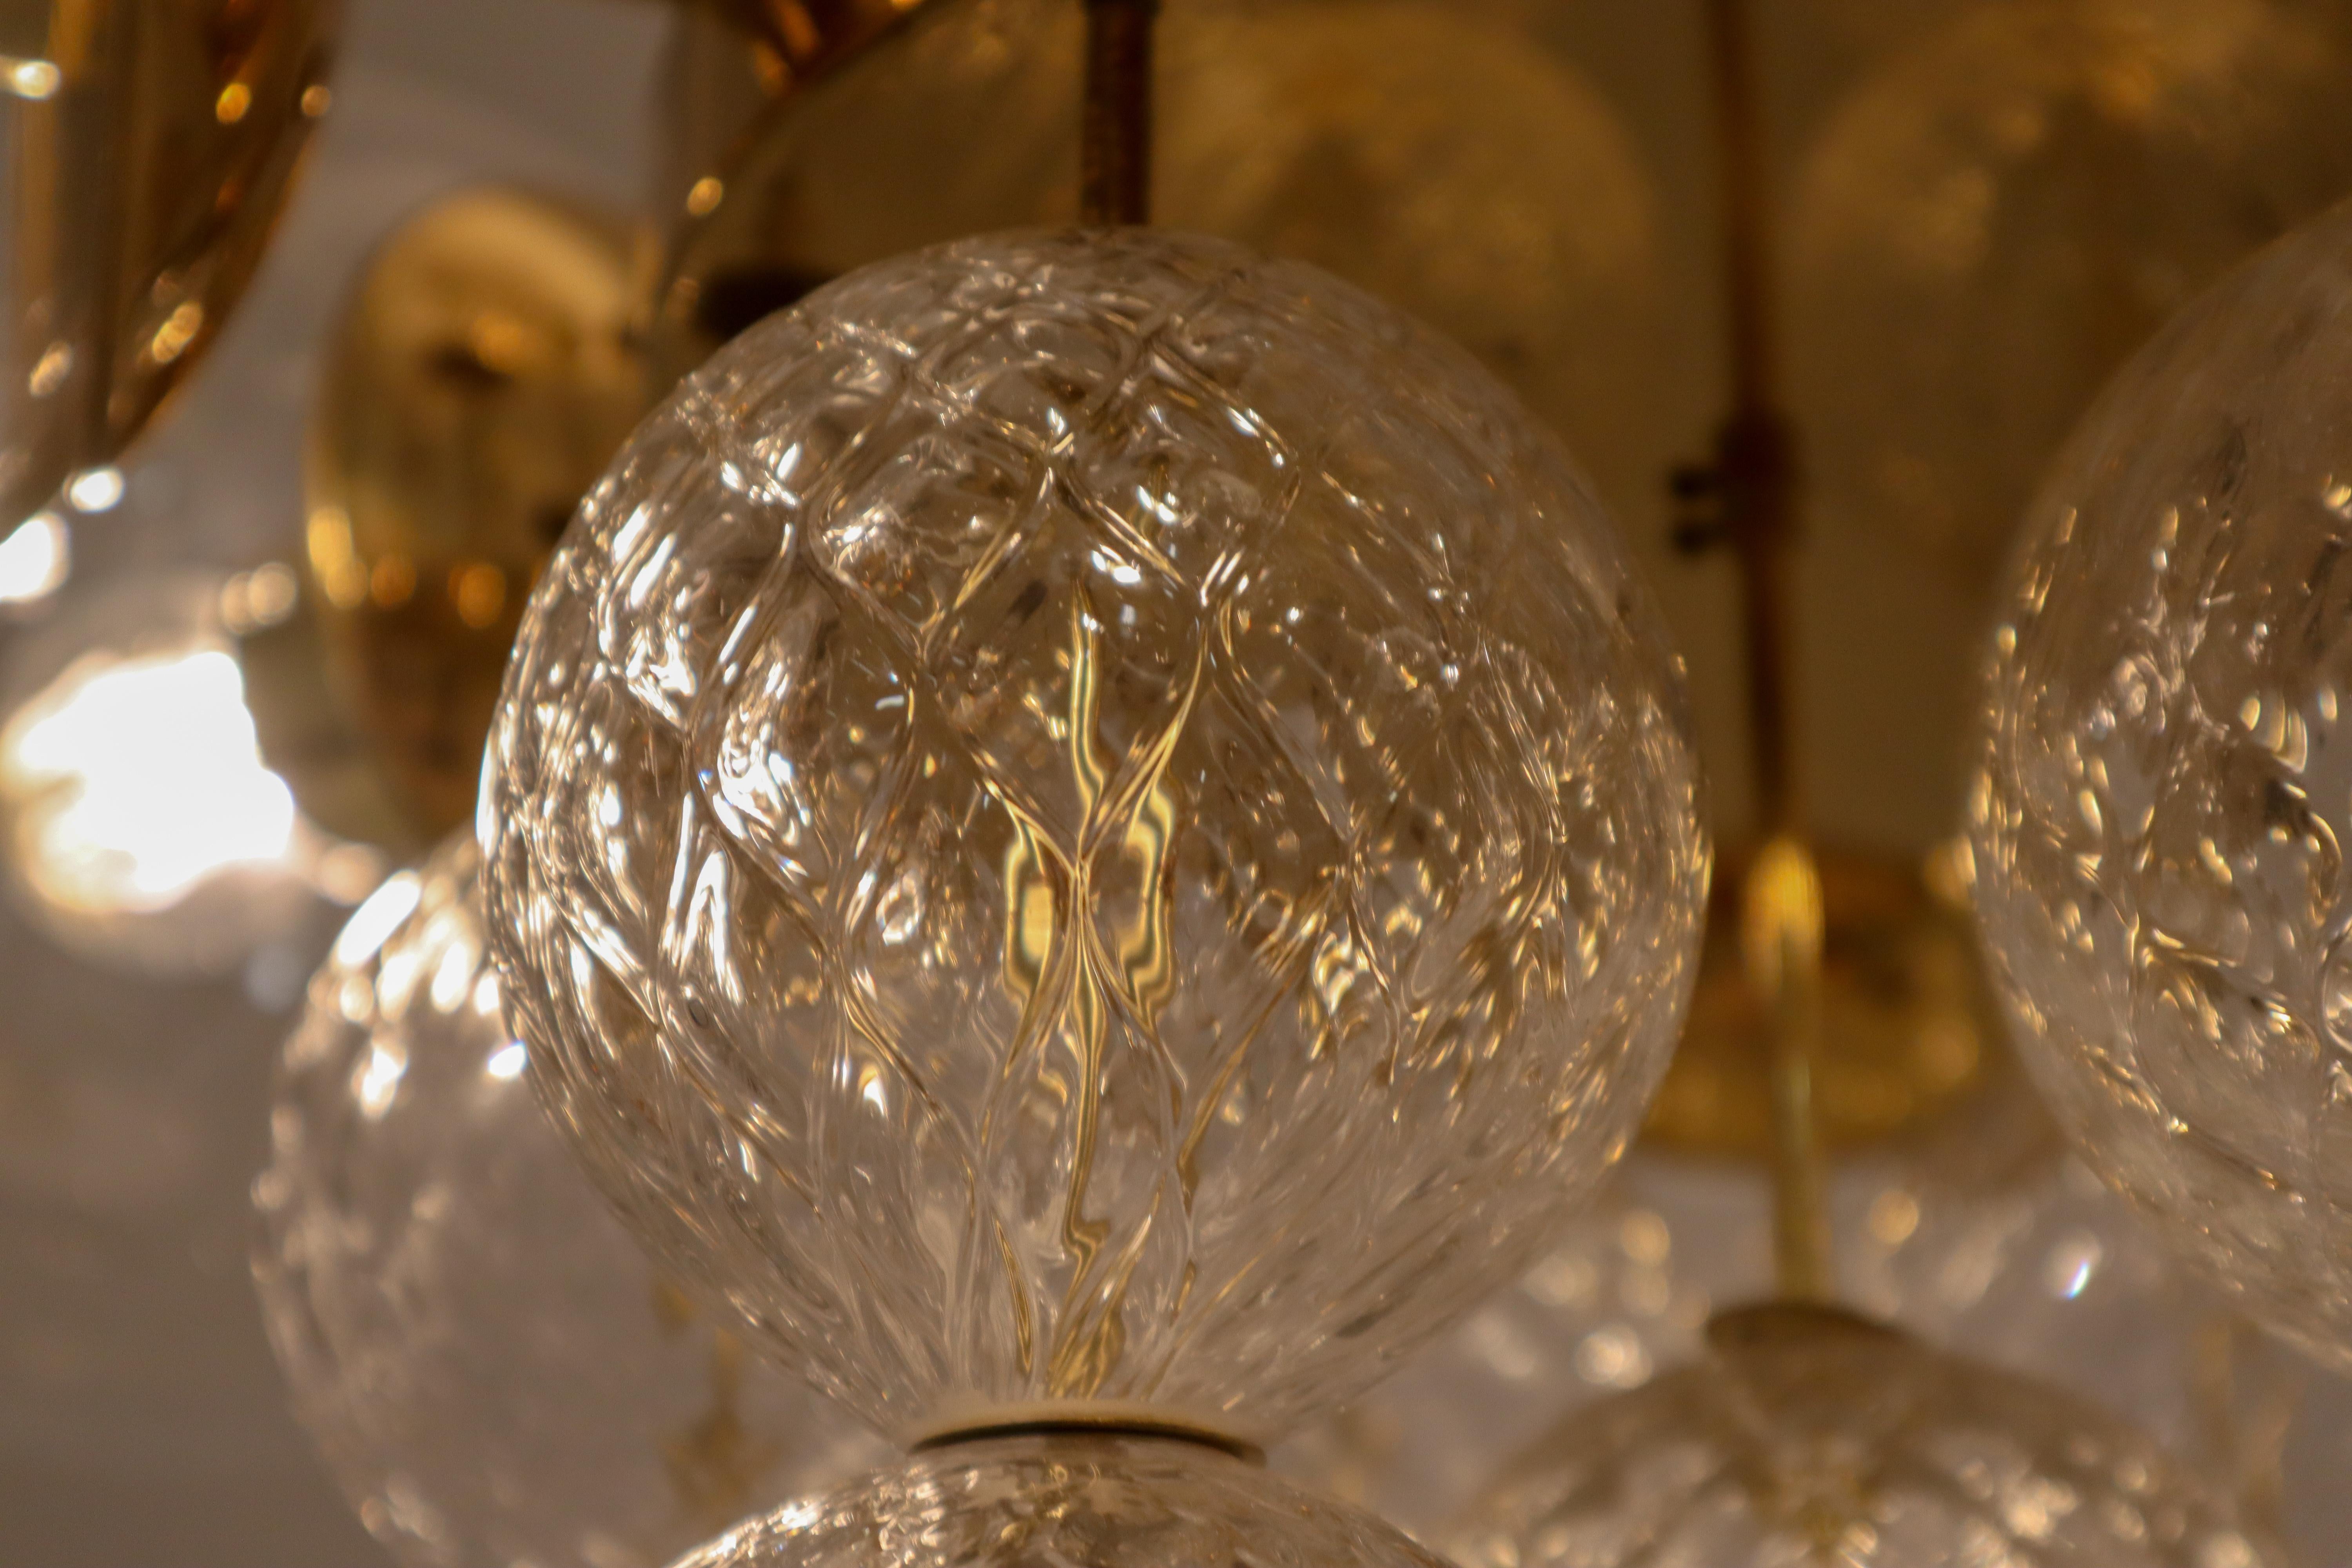 Midcentury Chandeliers with Brass Fixture and Hand-Blown Glass, Europe 1970s For Sale 2